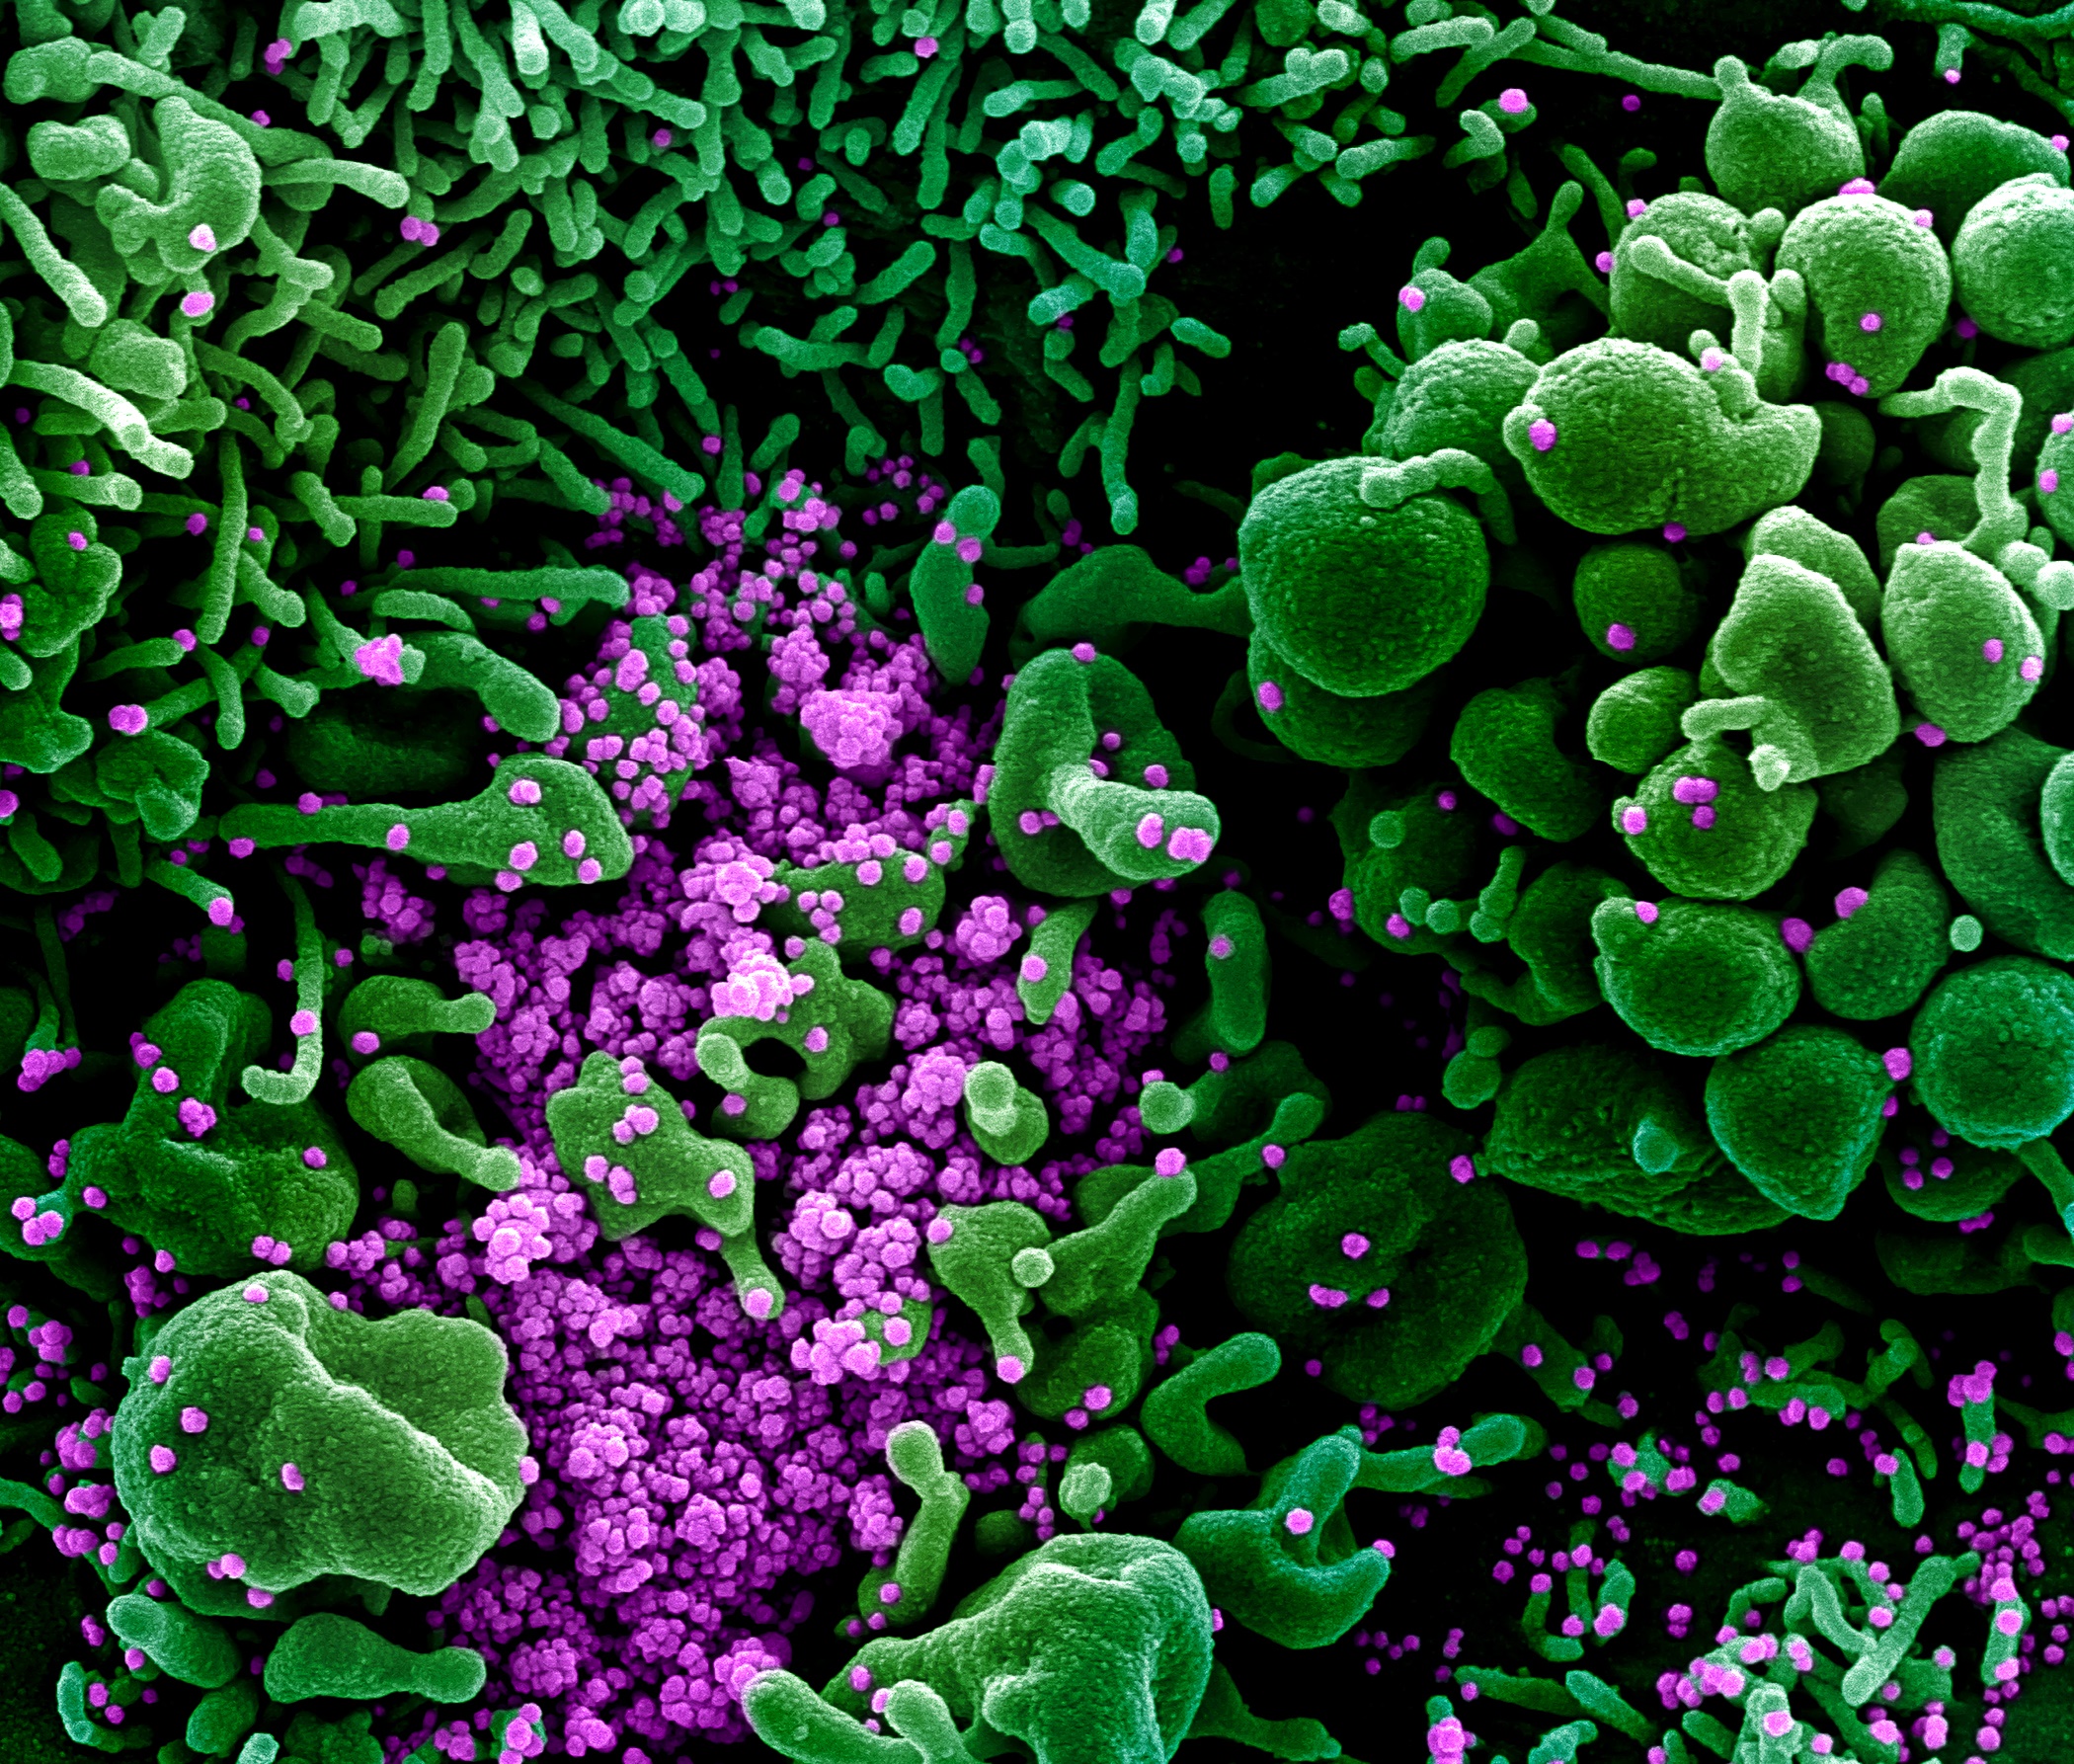 Colourized scanning electron micrograph of an apoptotic cell (green) heavily infected with SARS-COV-2 virus particles (purple), isolated from a patient sample. Image captured and color-enhanced at the NIAID Integrated Research Facility (IRF) in Fort Detrick, Maryland. Credit: NIAID